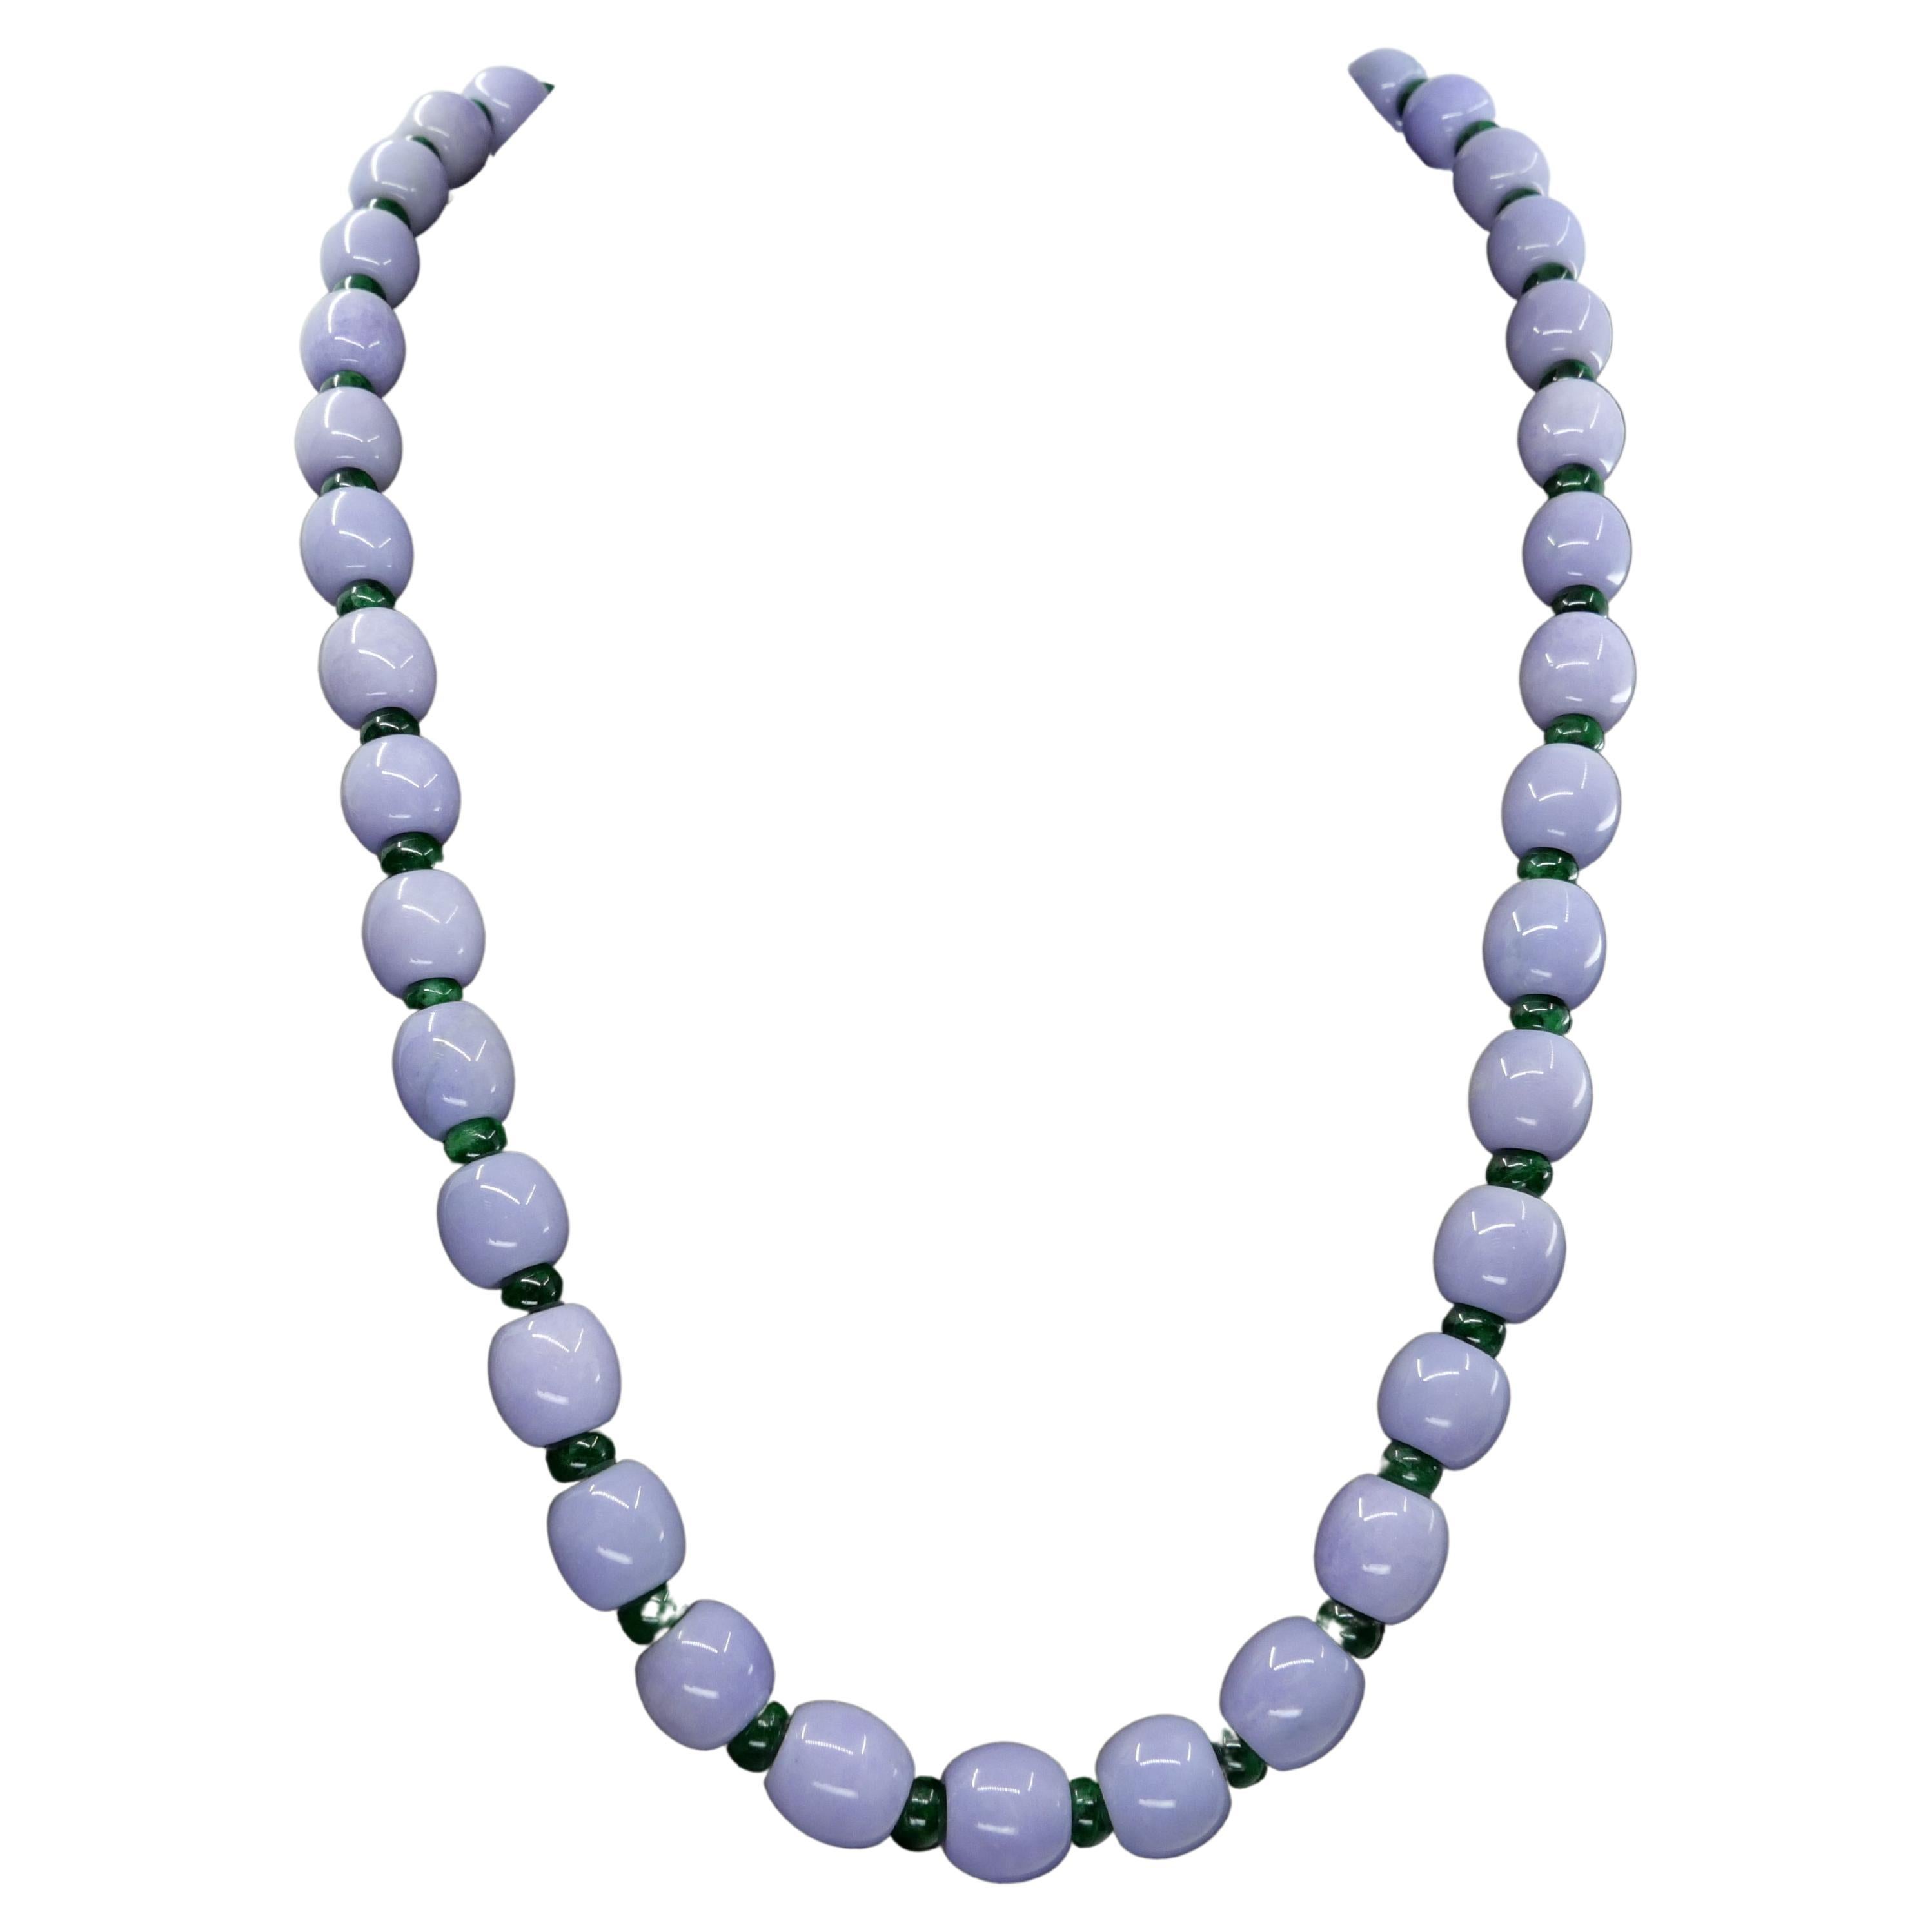 Fashion charm Icy Lavender JADE 10 mm Bead Beads Necklace 18" 